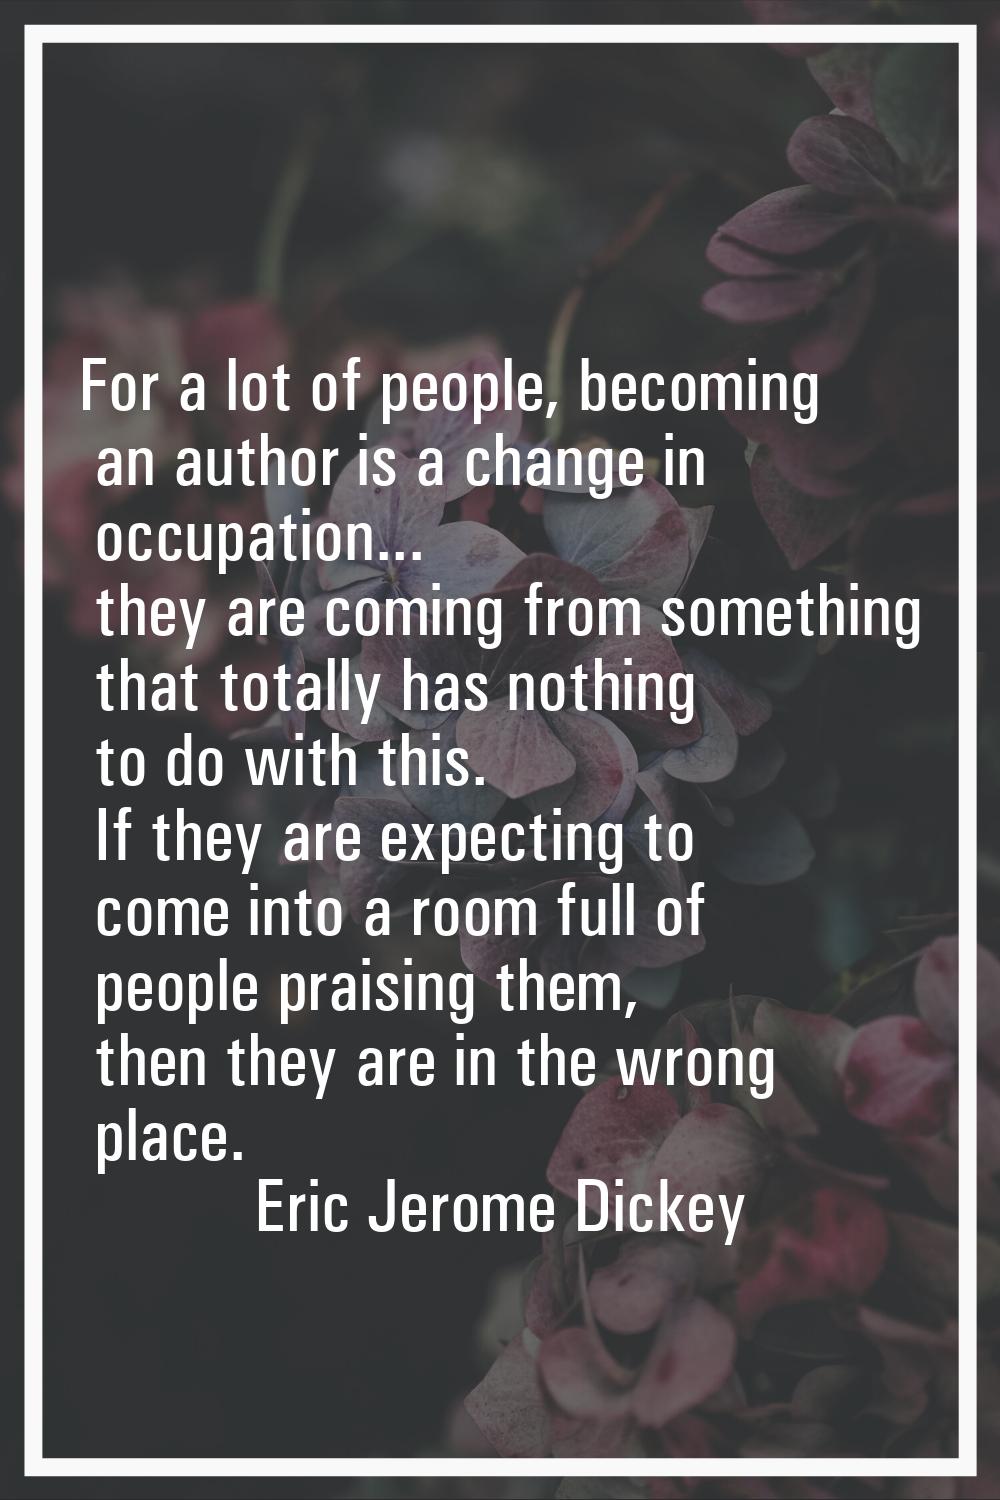 For a lot of people, becoming an author is a change in occupation... they are coming from something